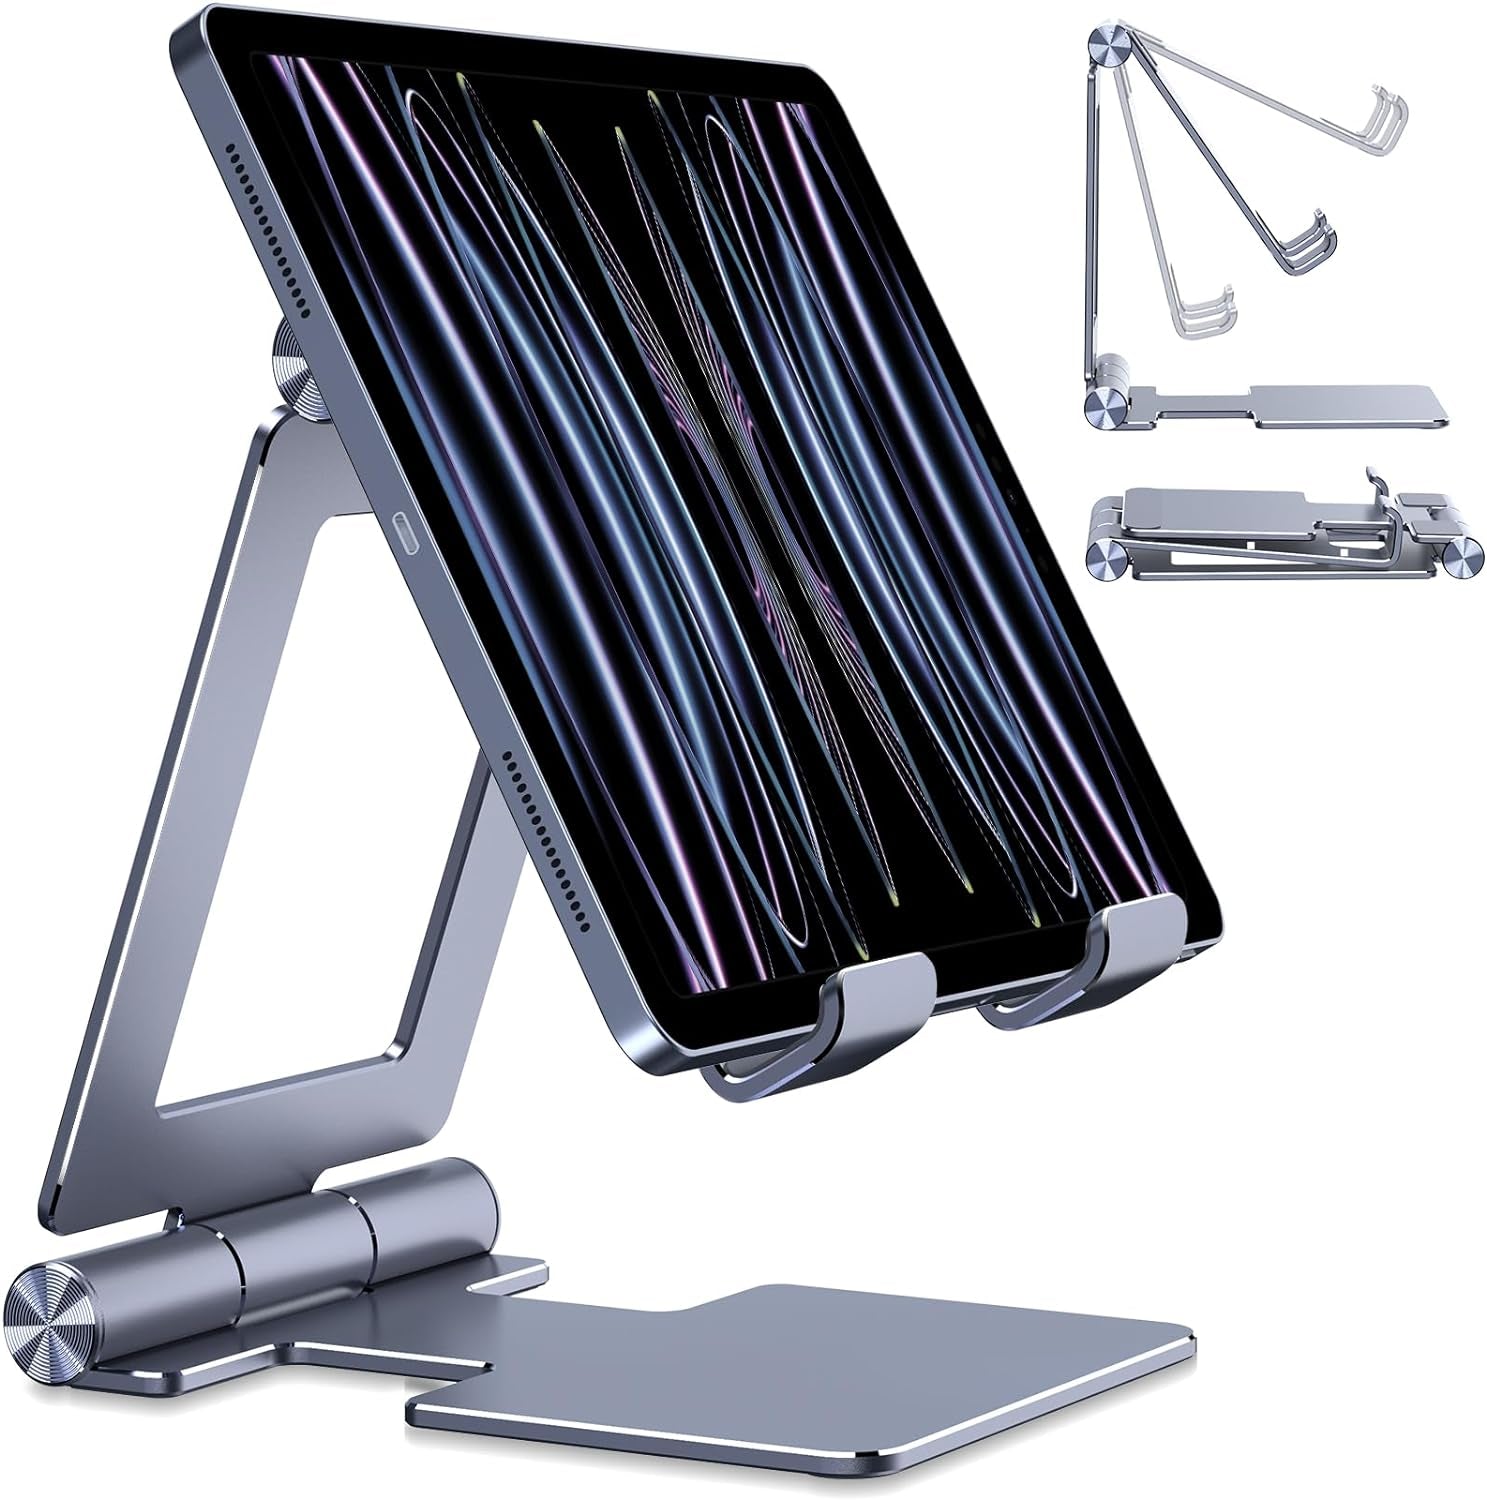 Tablet Stand, Adjustable & Foldable Aluminium for Ipad Stand,Designed for 2022 Ipad Air 5/4,For Ipad Mini 6/5,For Ipad 10.2,For Ipad Pro 12.9/11,Portable Monitor, Surface (4-13 Inch)-Grey Blue